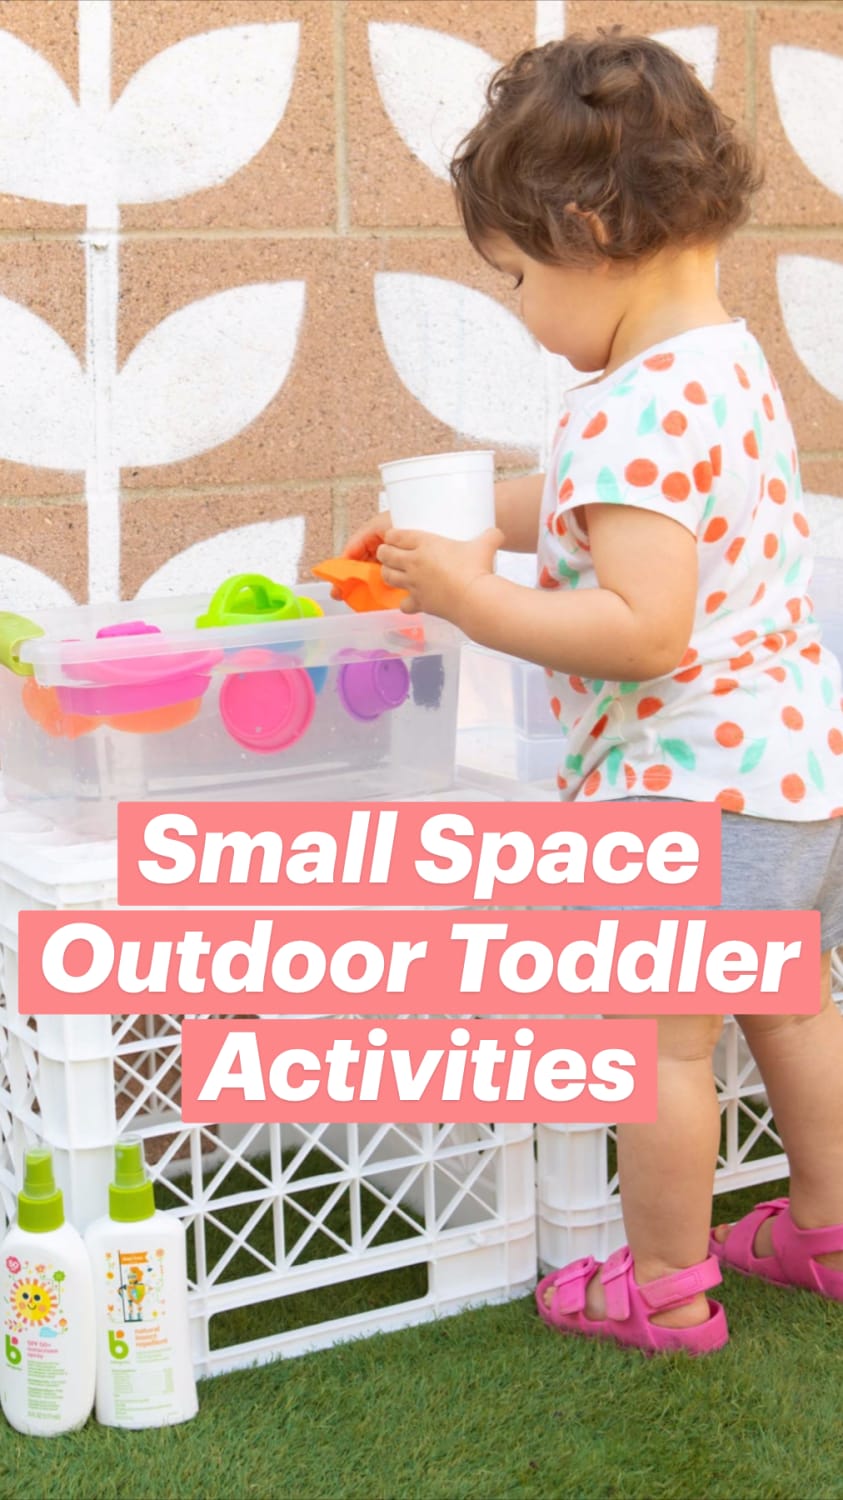 Small Space Outdoor Toddler Activities